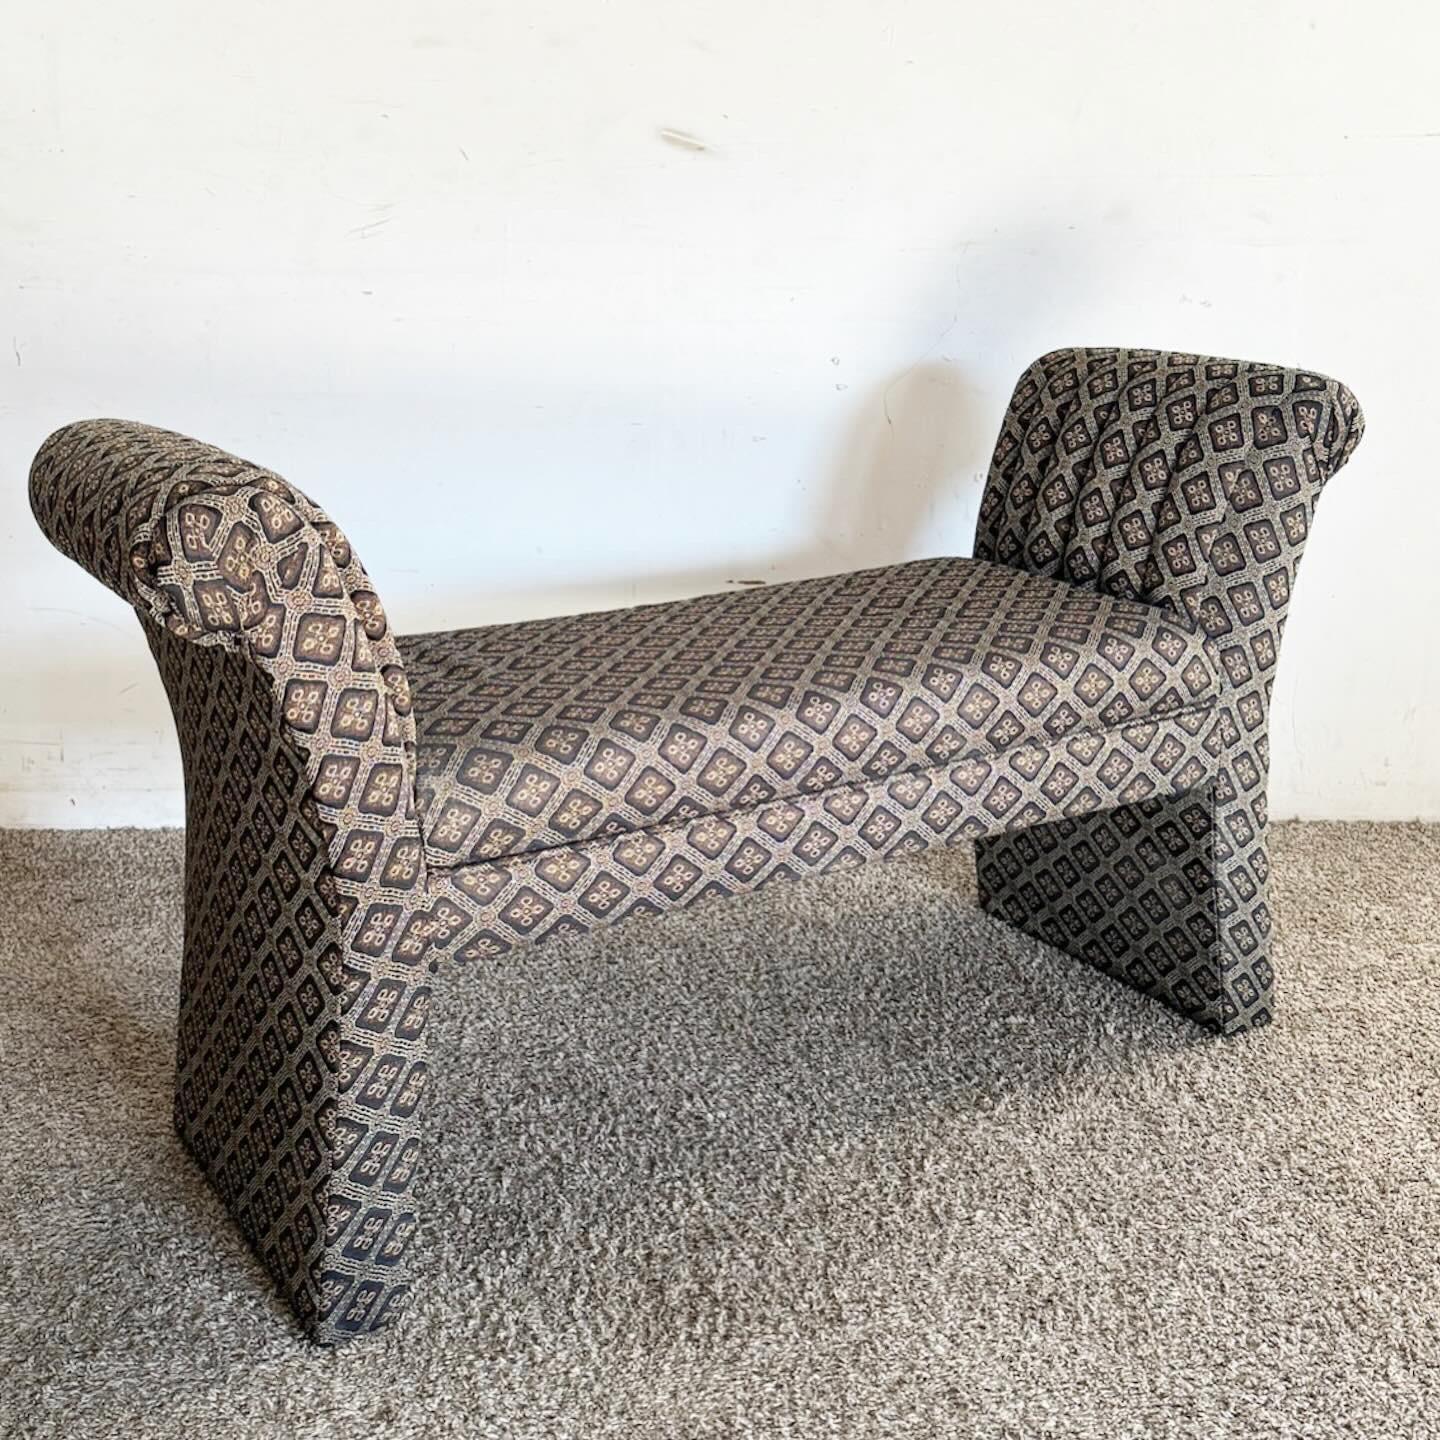 The Postmodern Flared Black Patterned Fabric Bench is a striking addition to any contemporary space. With its unique flared shape and bold black patterned fabric, it captures the essence of postmodern design. This bench is both functional and